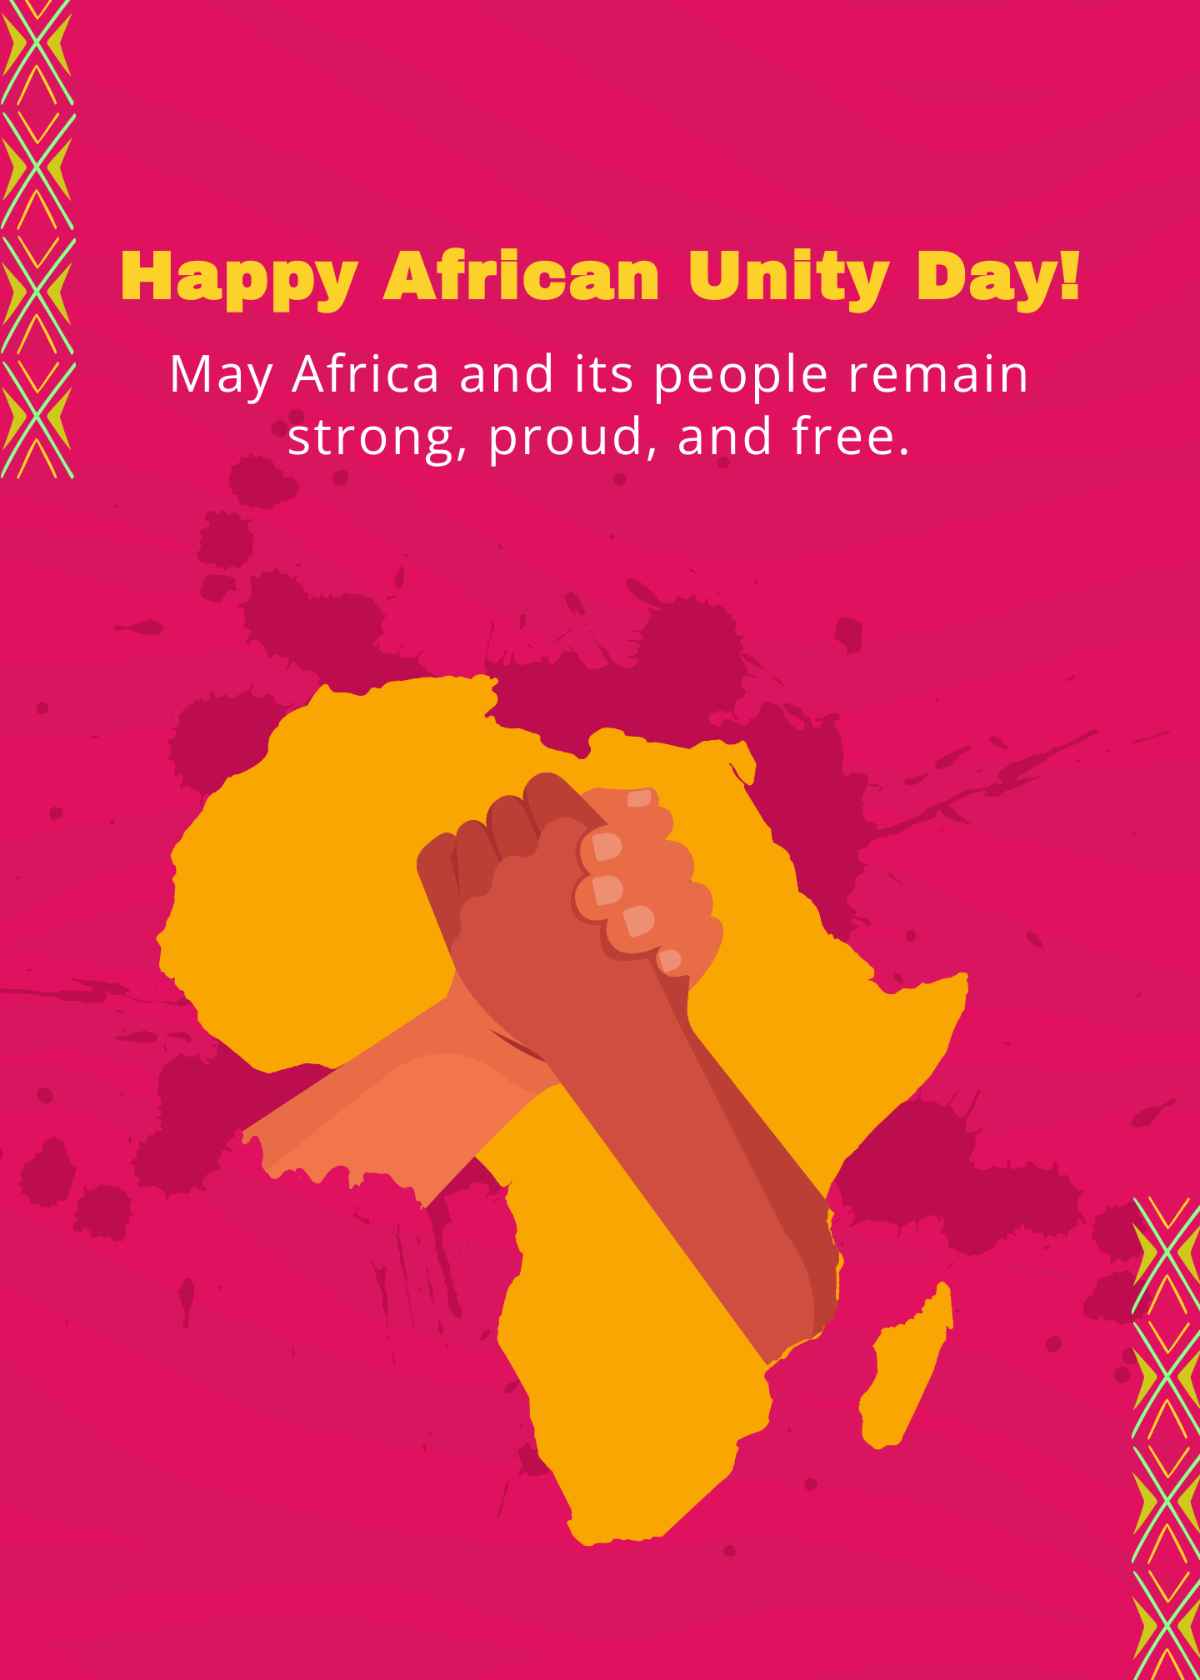 African Unity Day Greeting Card